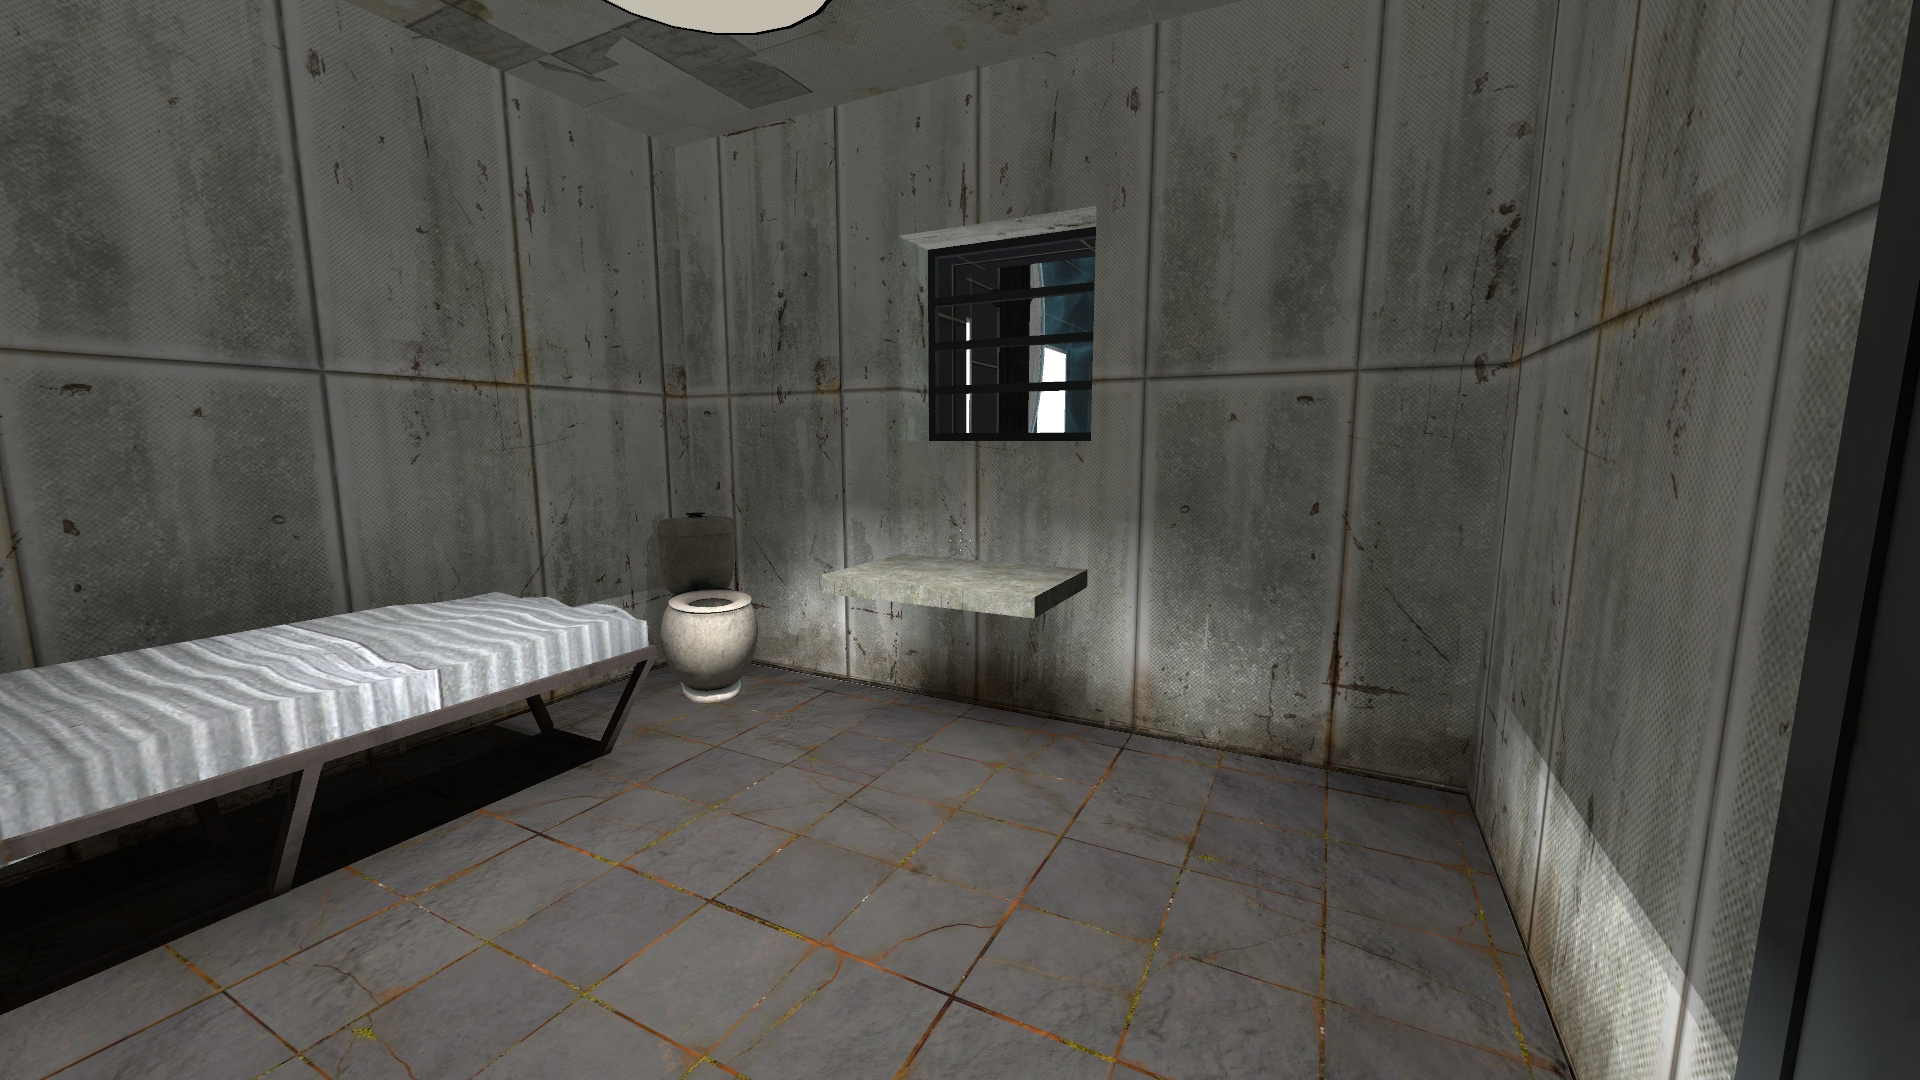 First shots of Carter's prison cell image - MillenniuM mod for Portal 2 - Mod DB